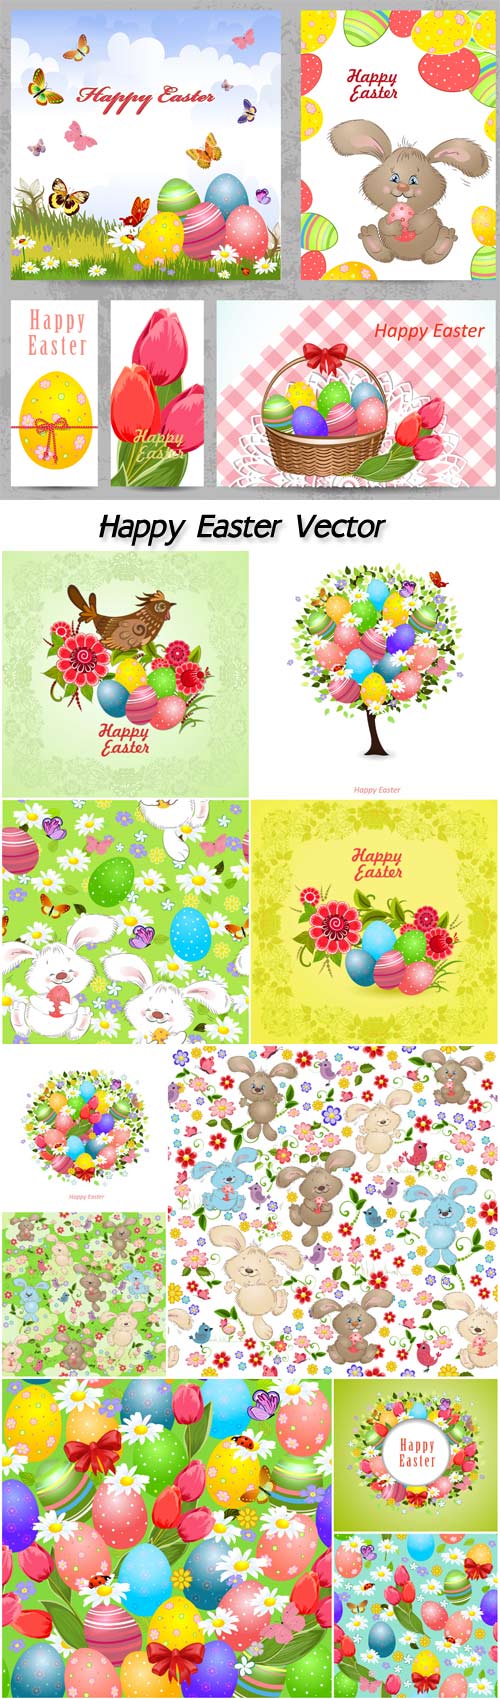 Happy Easter, Easter vector texture with rabbits